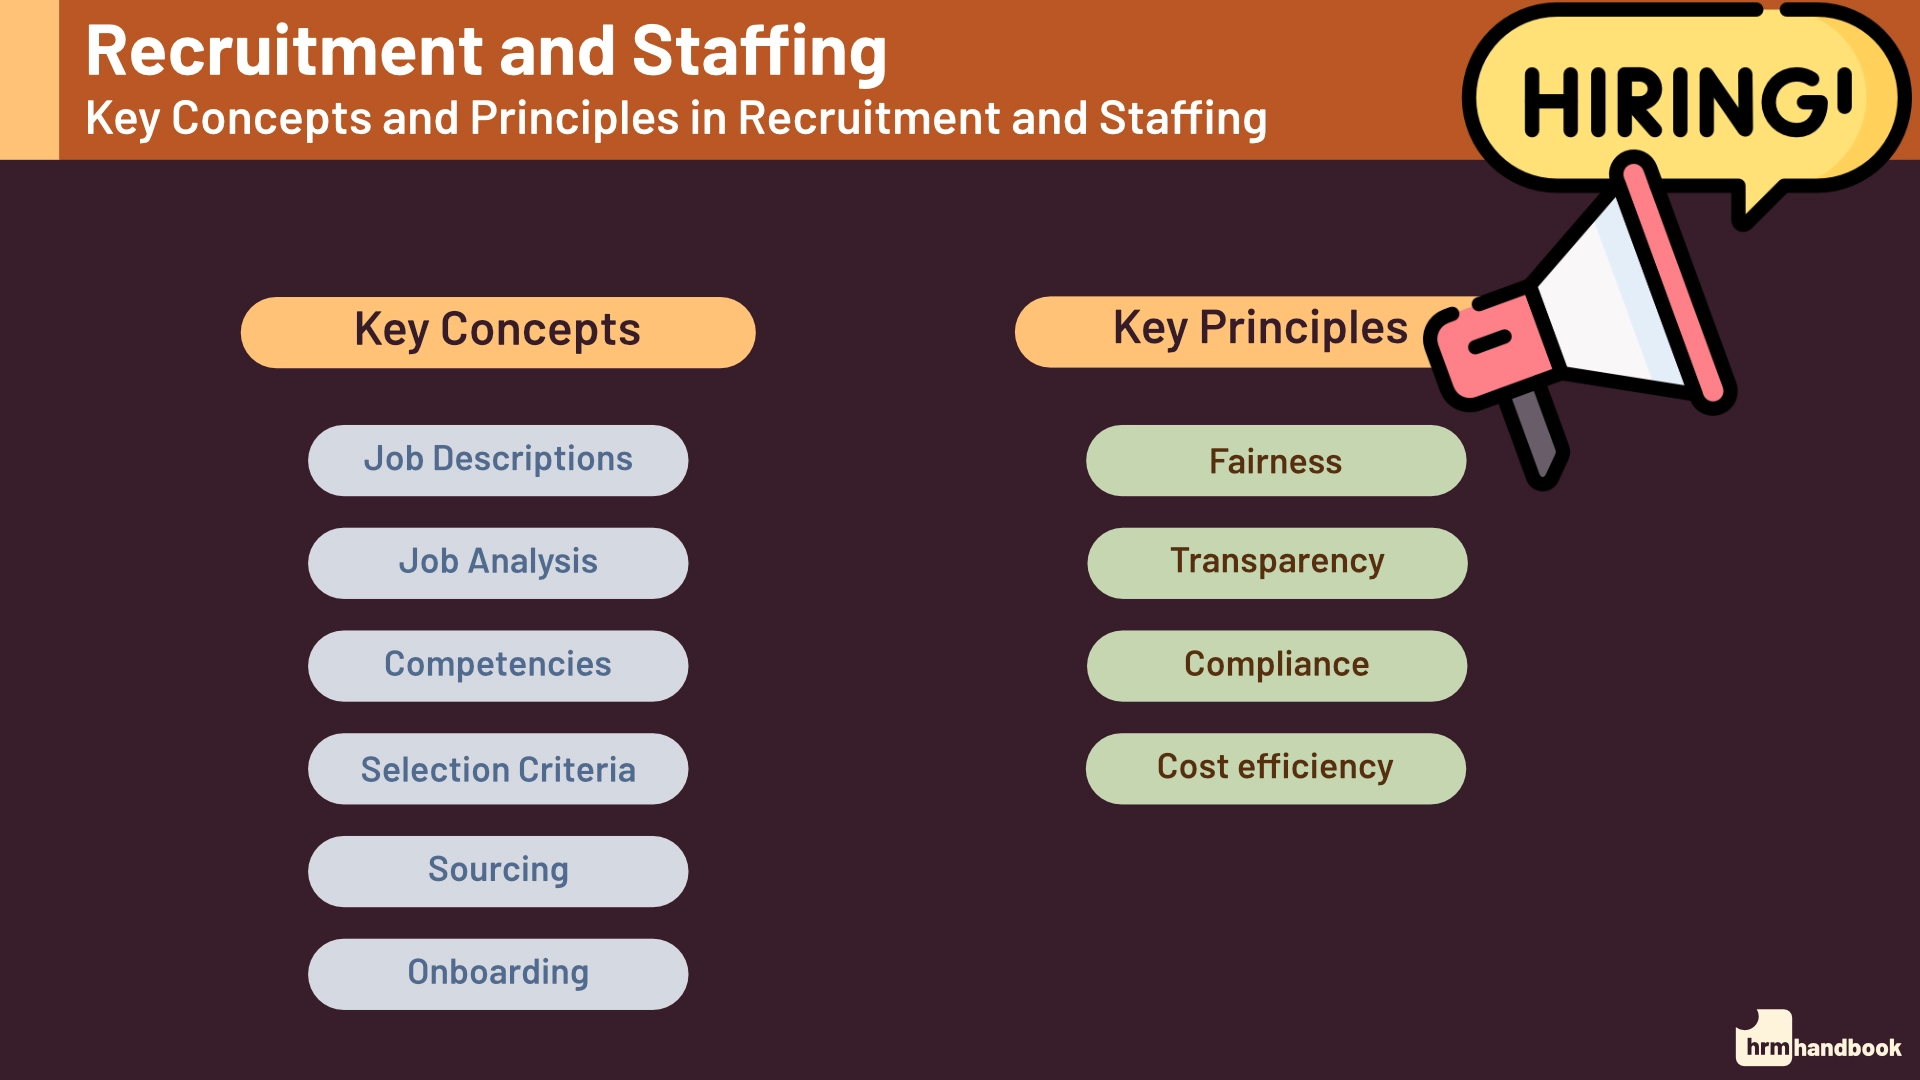 Recruitment and Staffing: Key Concepts and Principles